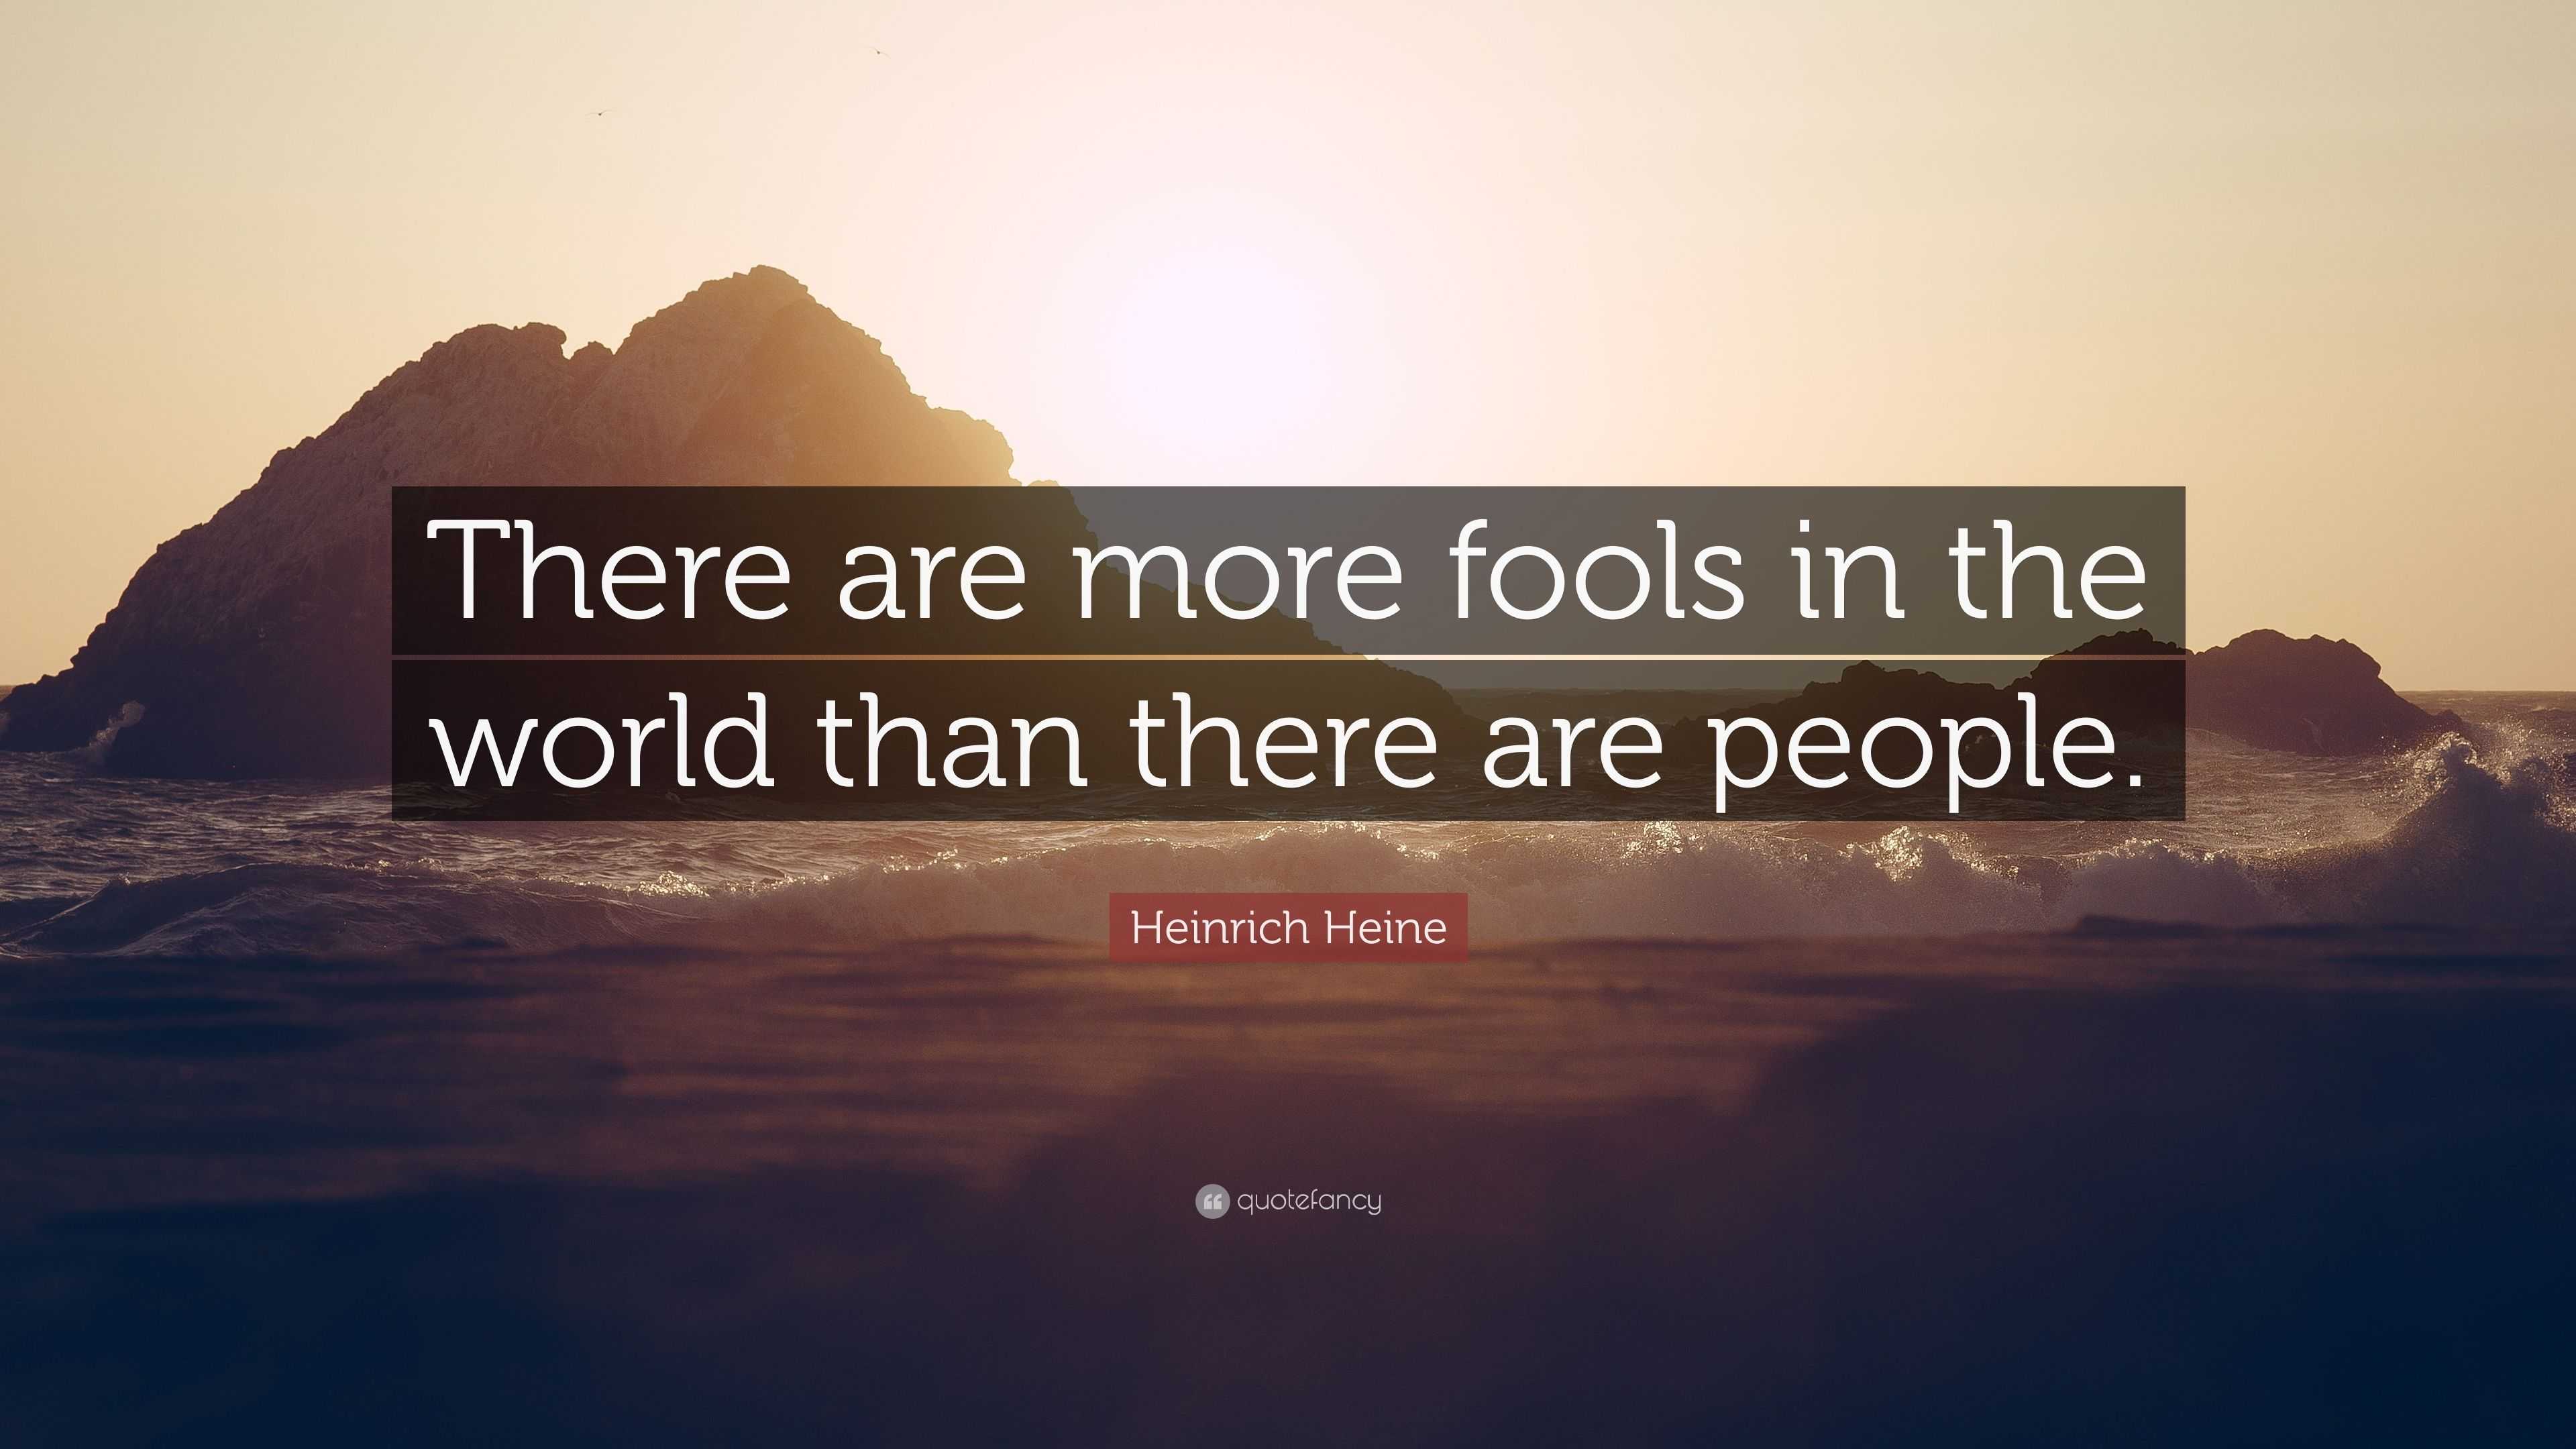 Heinrich Heine Quote: “There are more fools in the world than there are ...